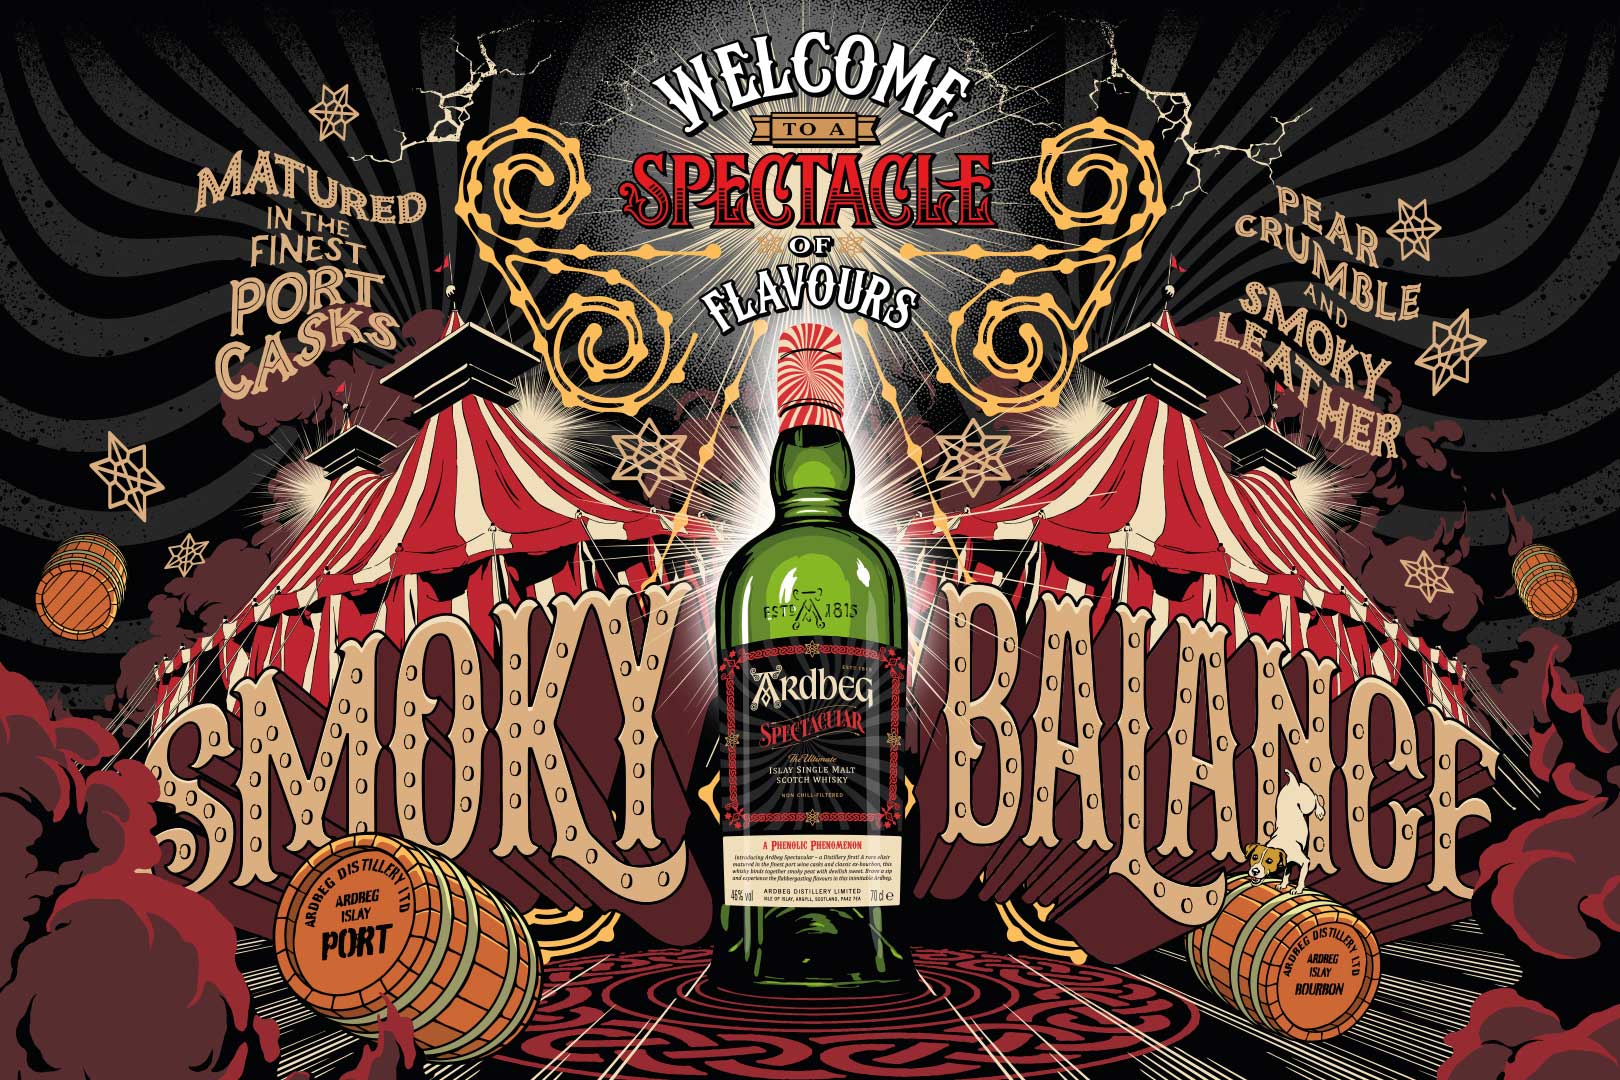 You are currently viewing Ardbeg Spectacular